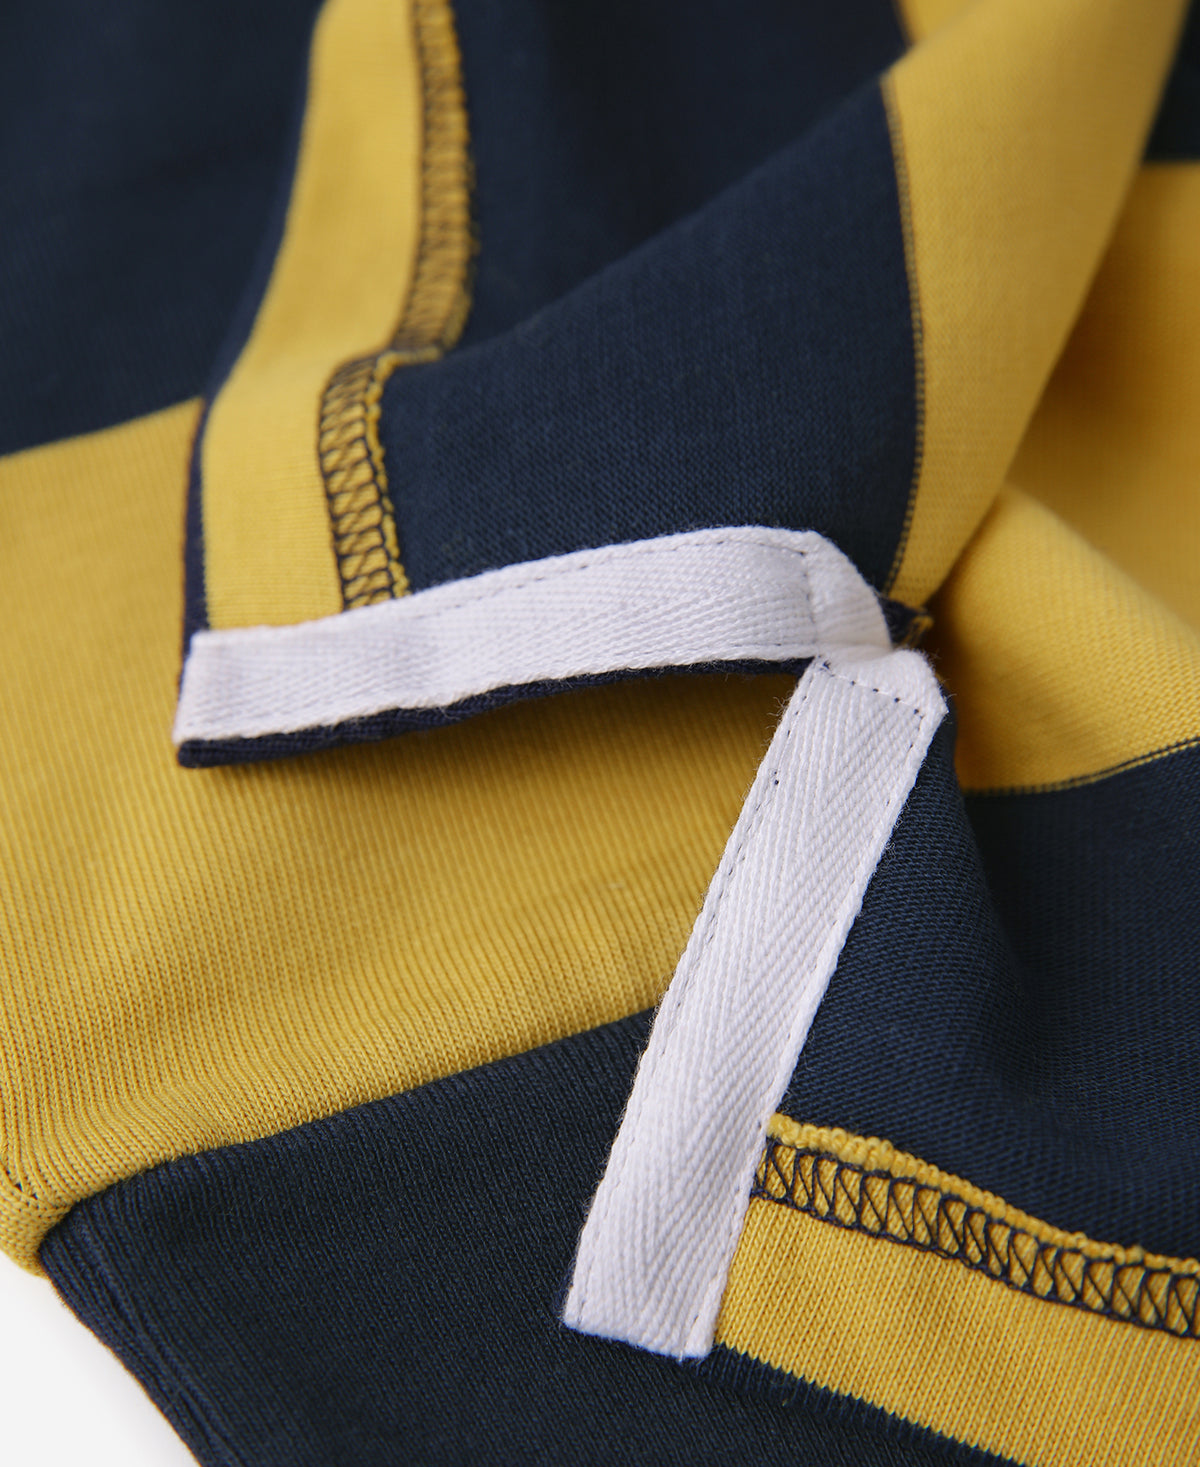 Classic Fit Striped Jersey Rugby Shirt - Yellow/Navy